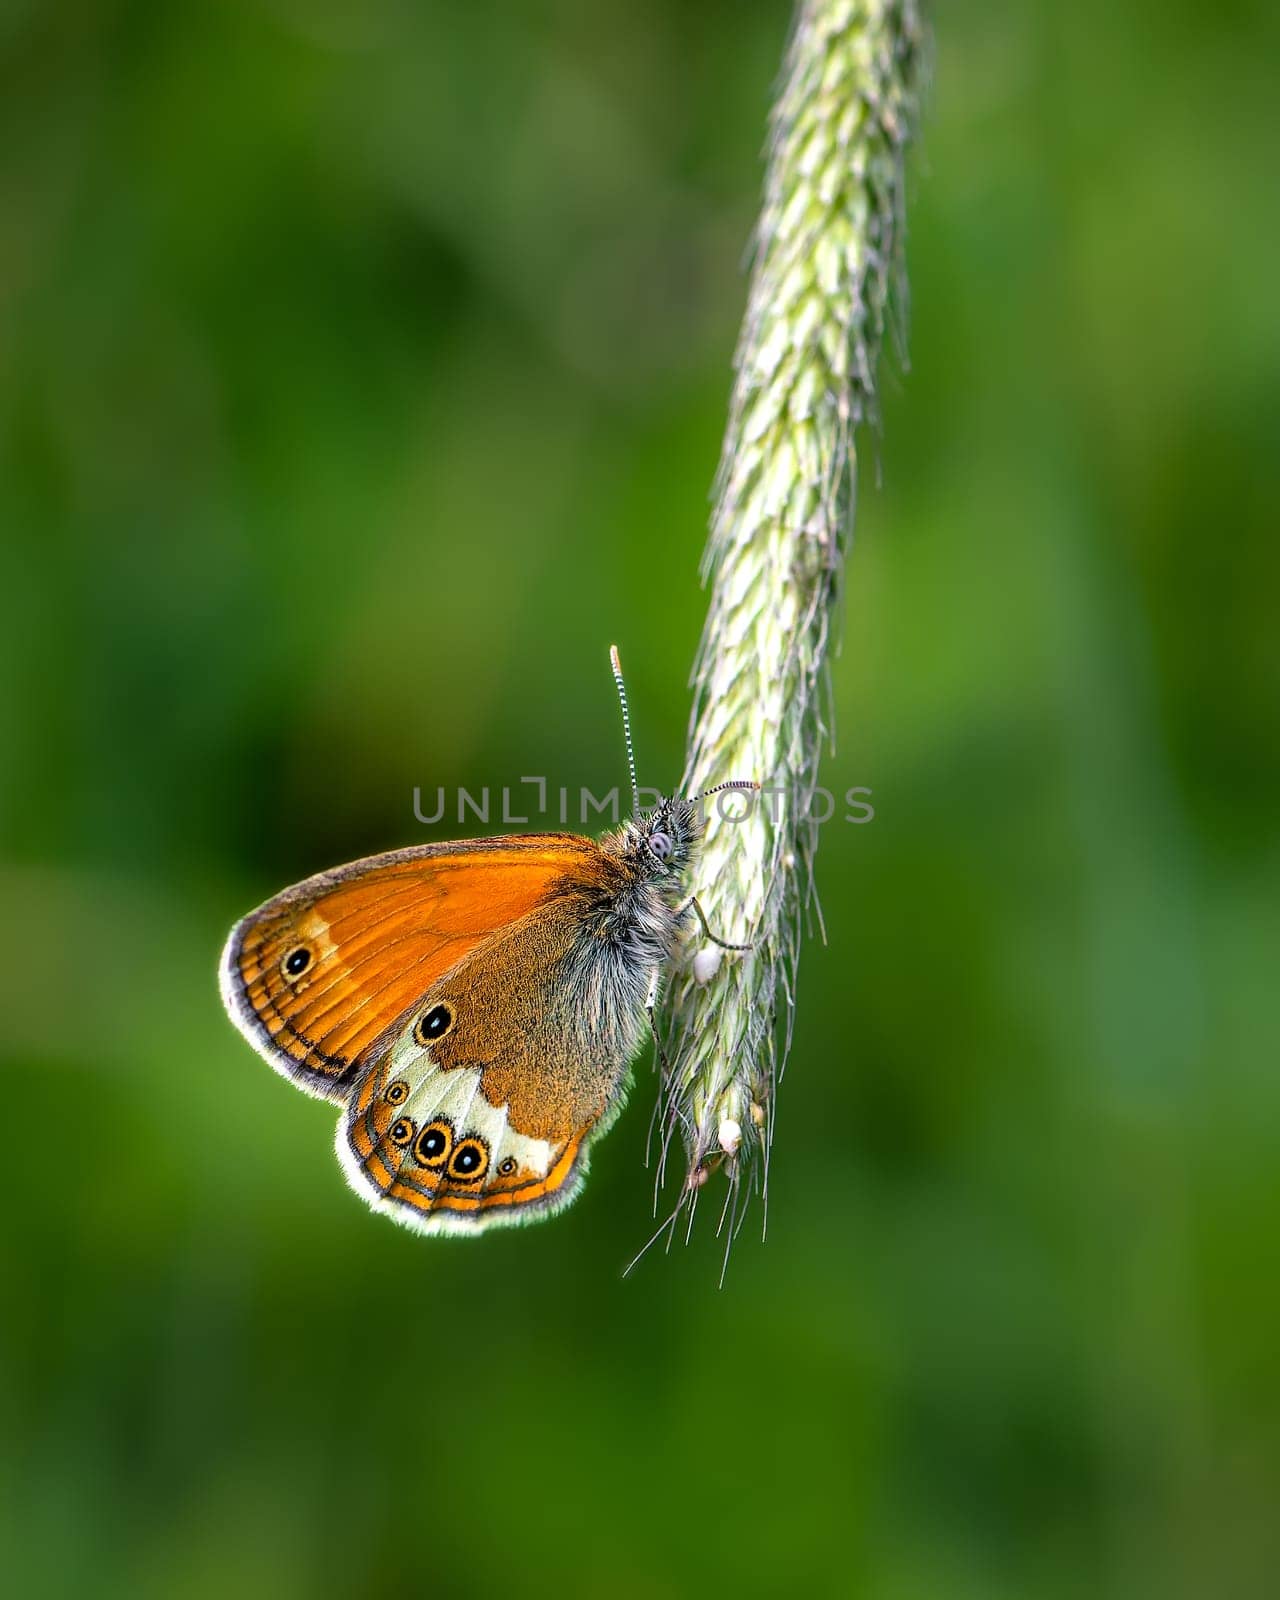 Brown butterfly on green blurred background, close-up photo of a butterfly